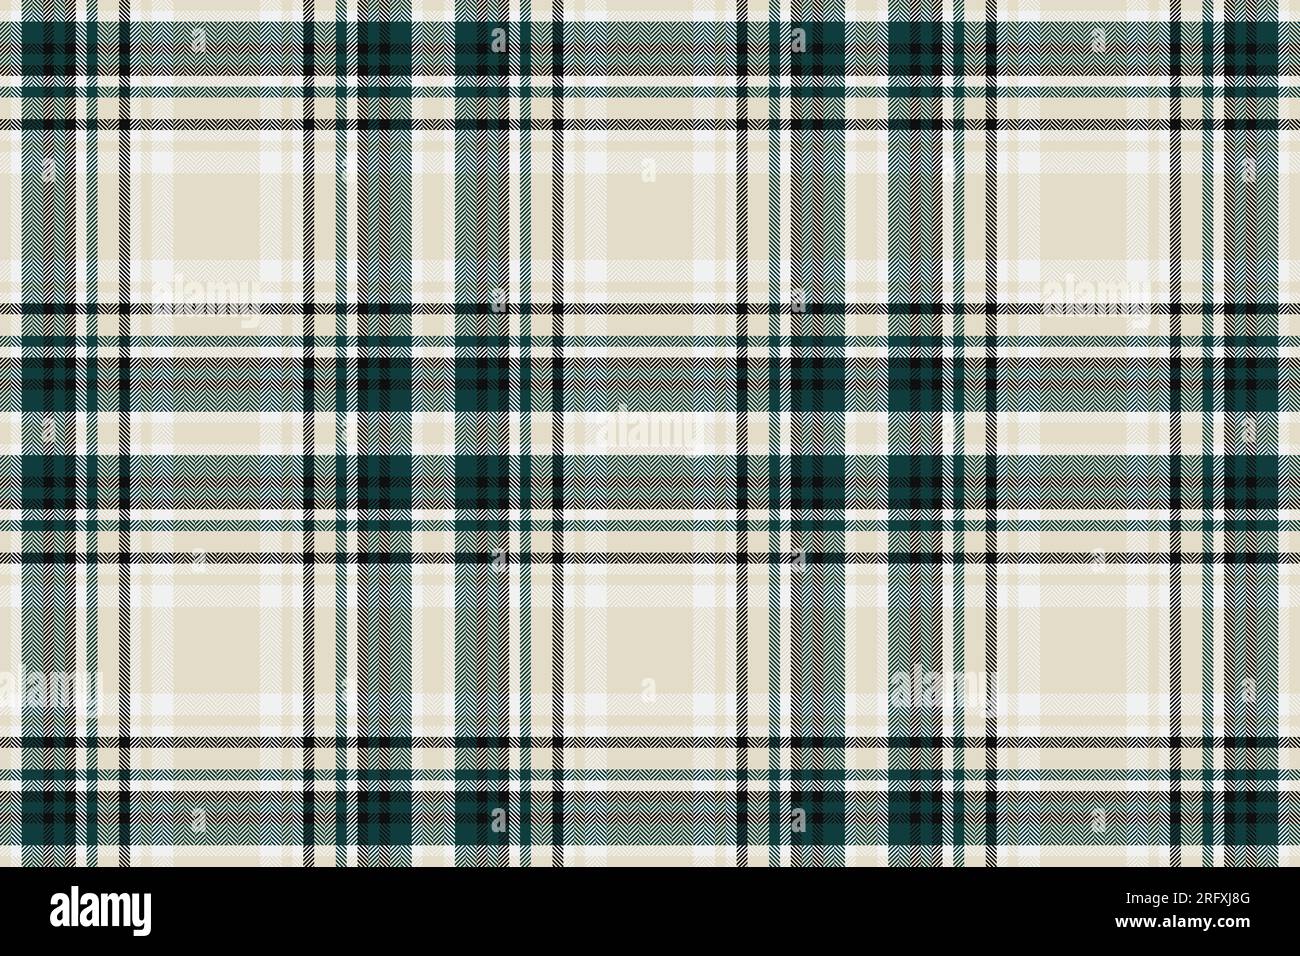 Vector plaid tartan of pattern textile seamless with a fabric background texture check in light and white colors. Stock Vector